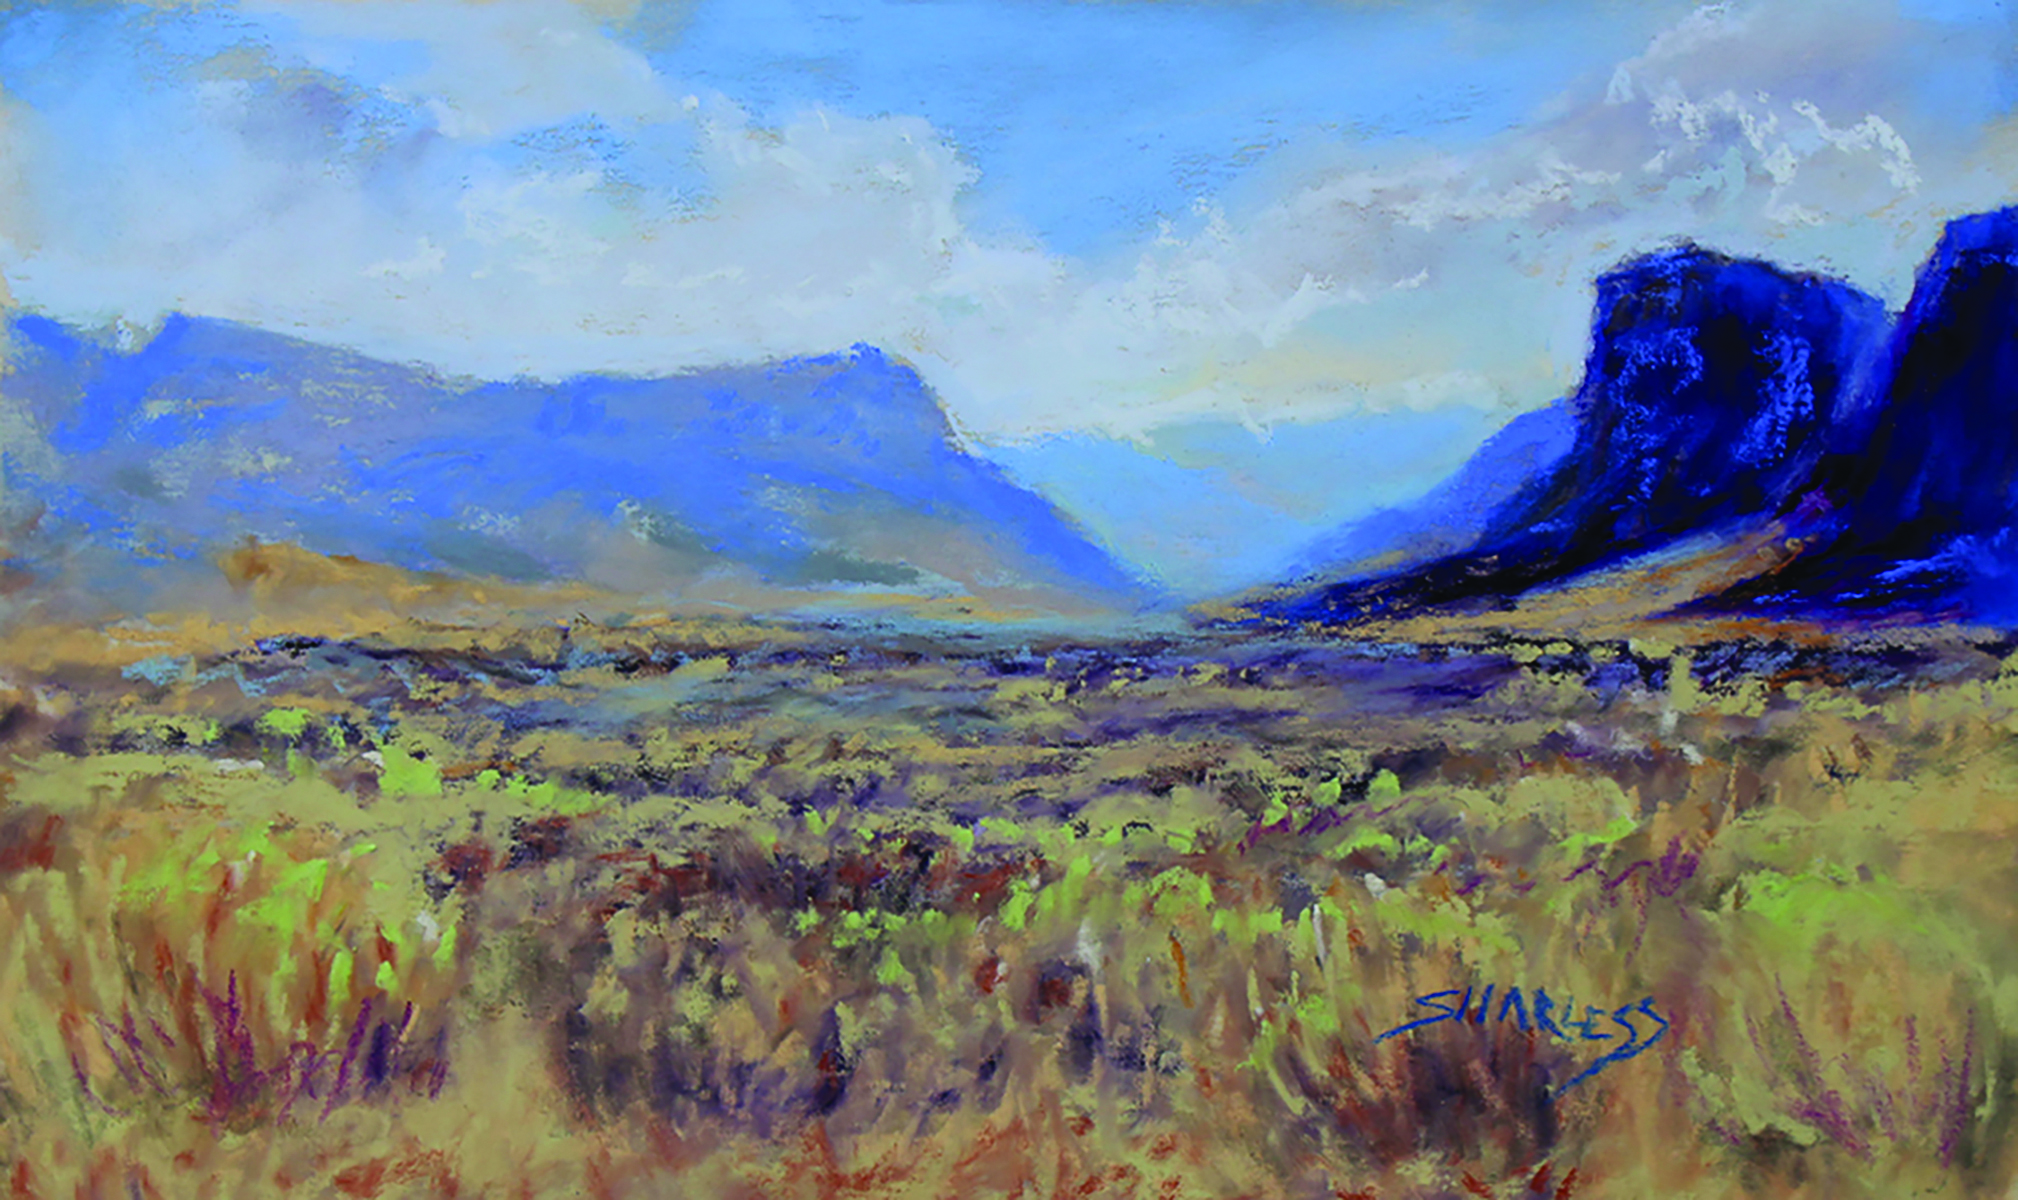 Sarah Harless (b. 1984), "Alpine," [Big Bend National Park, Texas], 2019, pastel on board, 6 x 8 in., available from the artist